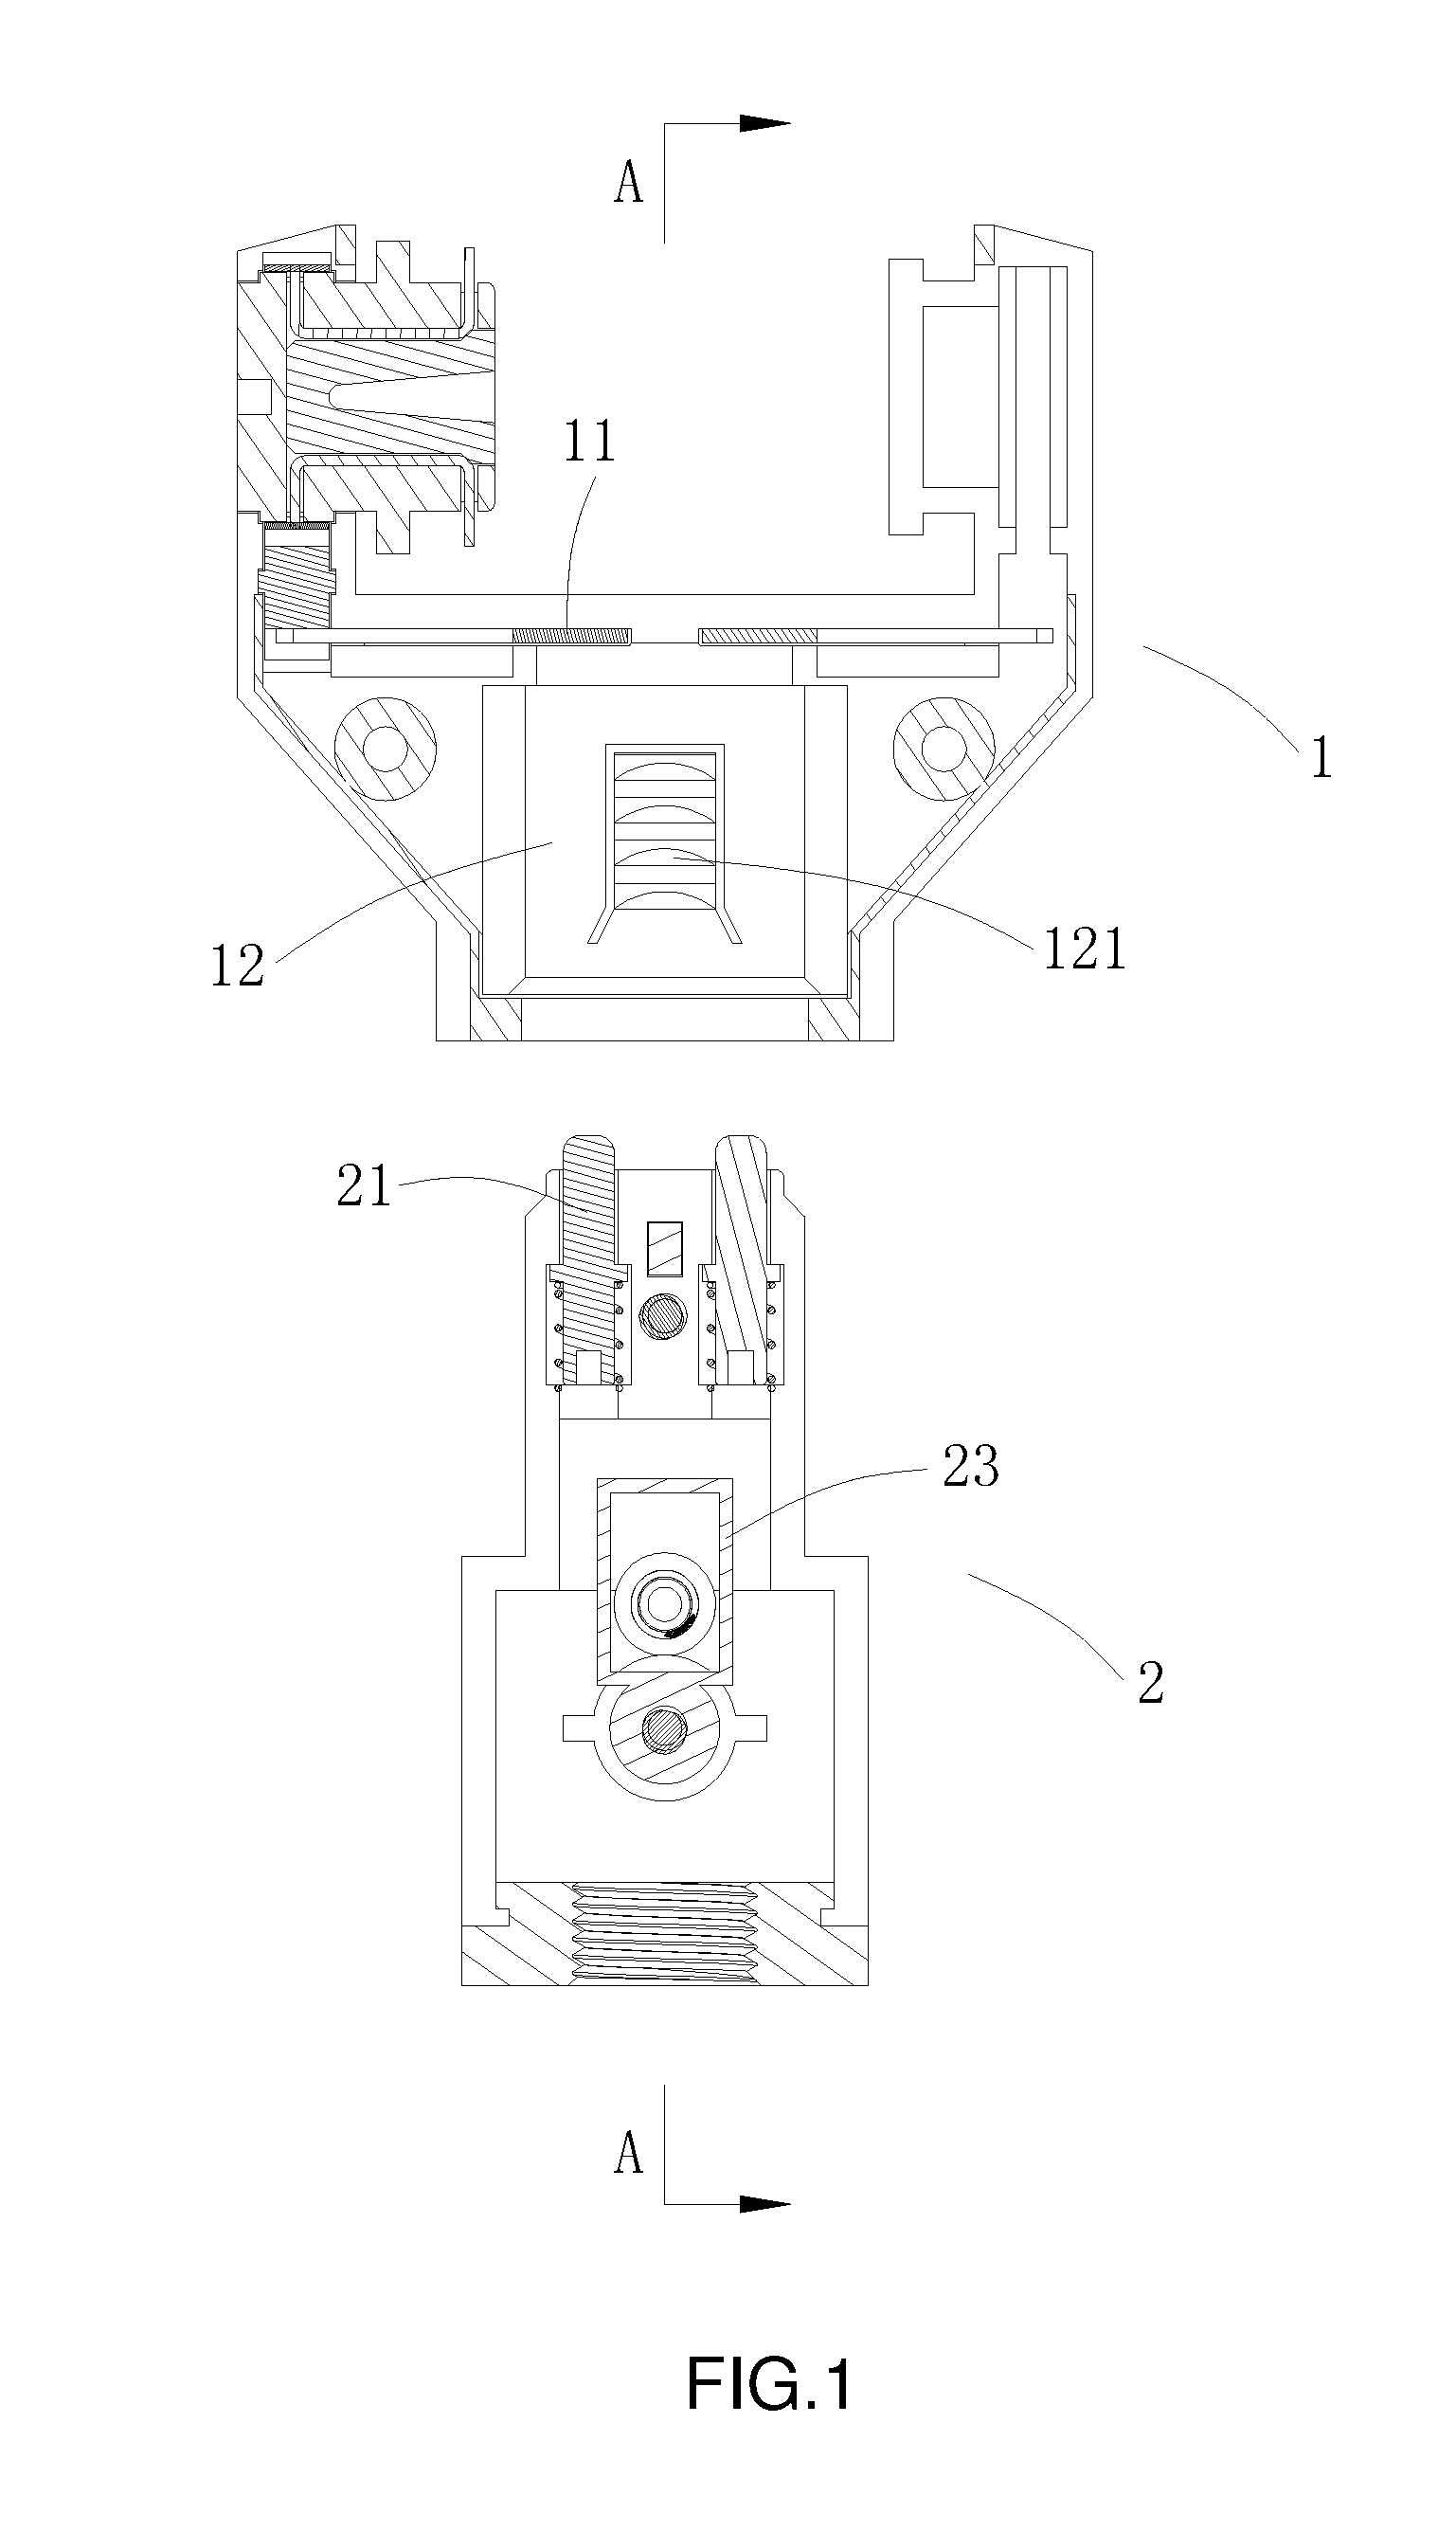 Quickly connectable plug and socket for power connection of electrical lighting apparatus